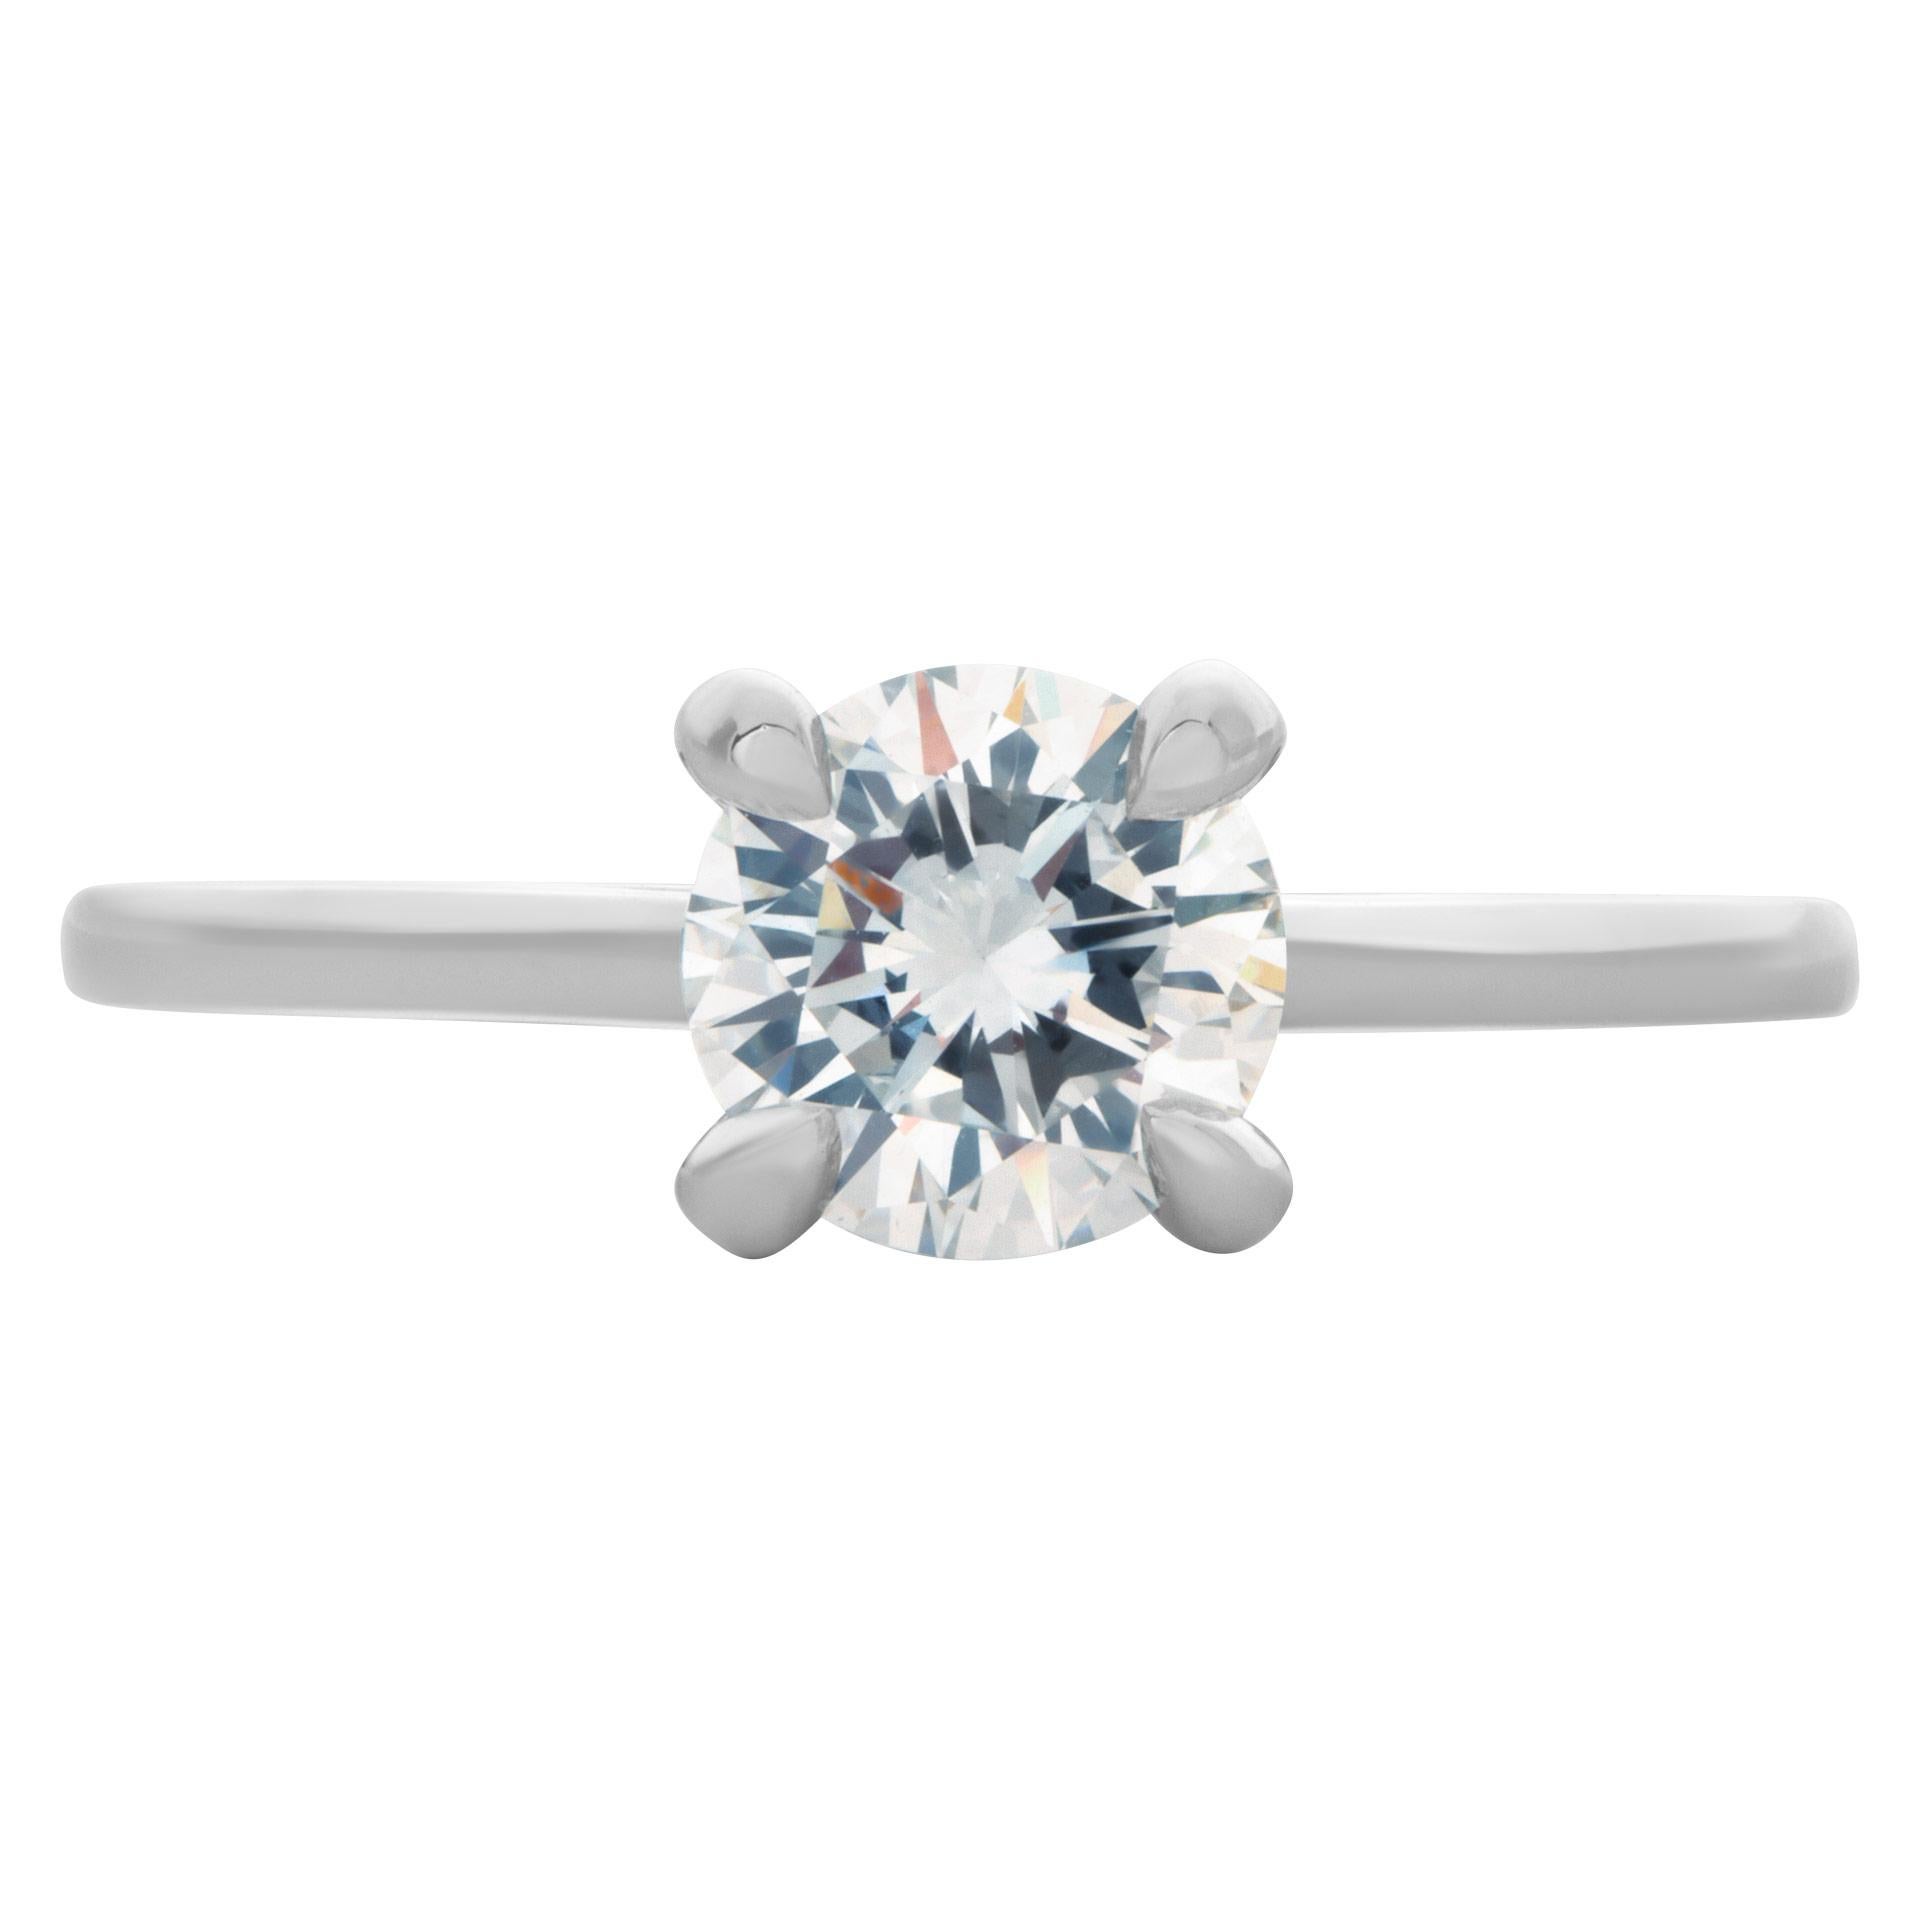 GIA report certified round brilliant cut diamond ring 1.01 carat (E color, IF clarity) set in platinum setting. Size 7. This GIA report certified ring is currently size 7 and some items can be sized up or down, please ask! It weighs 0 gramms and is